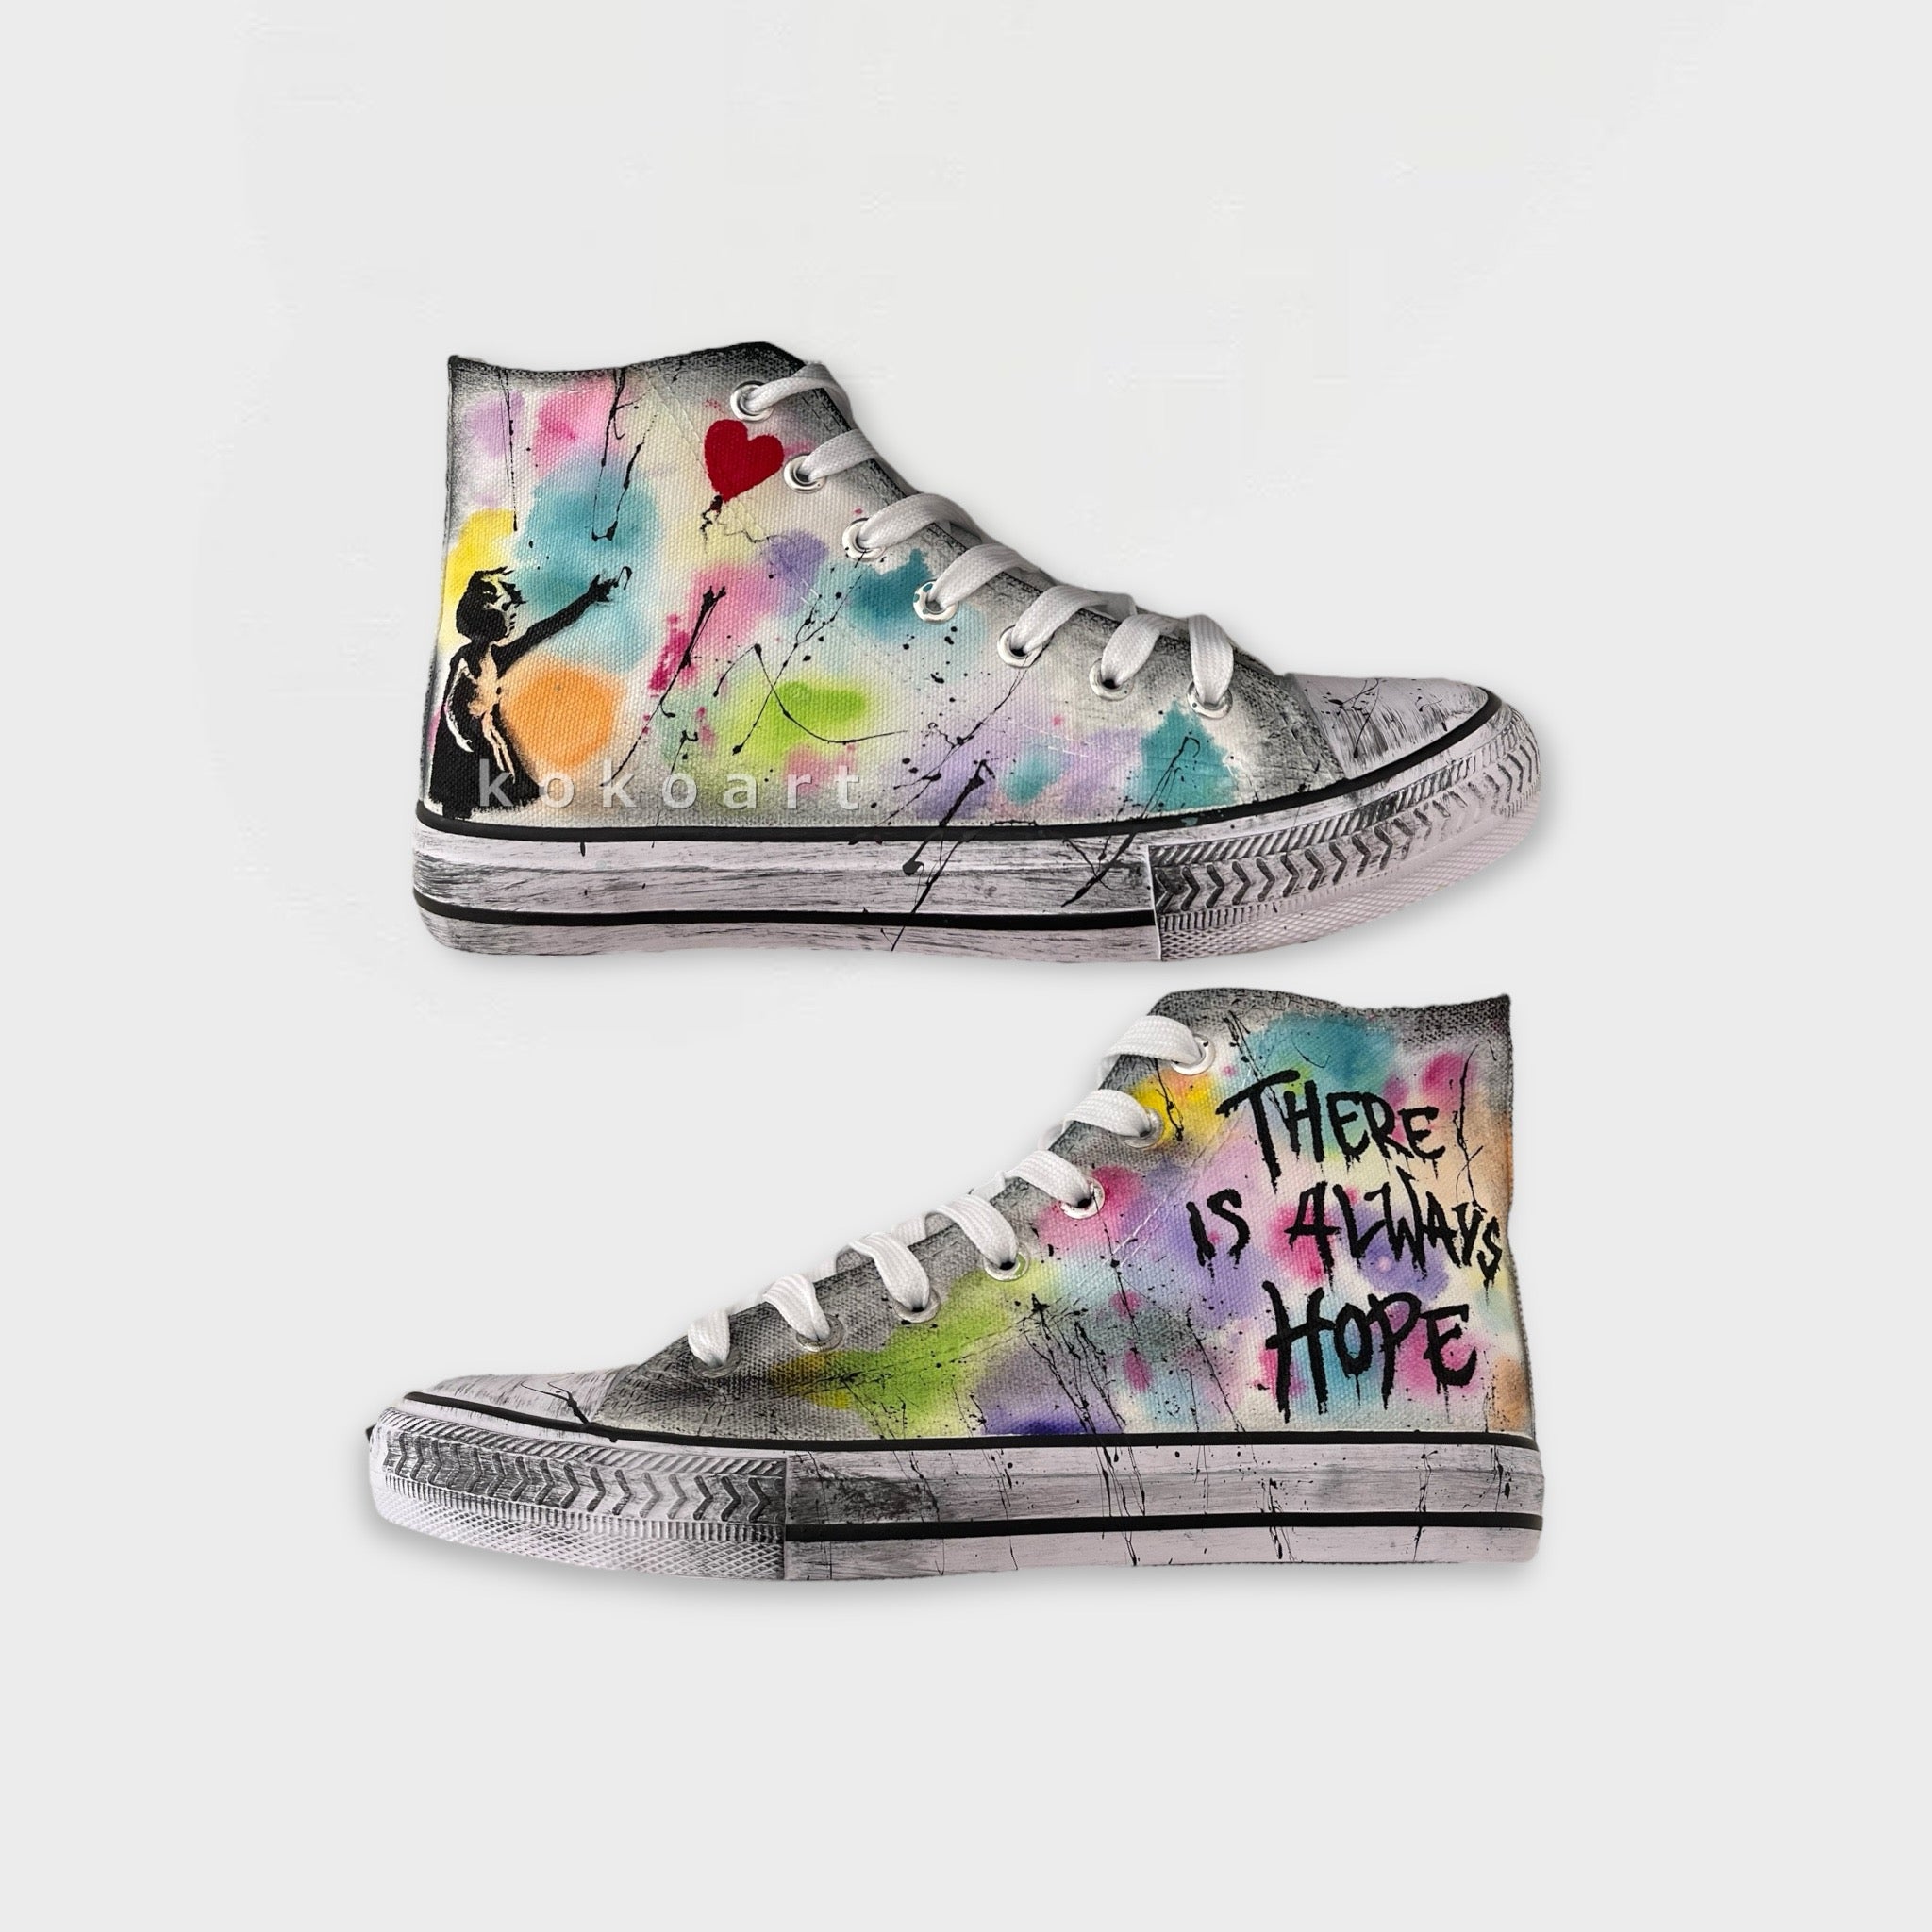 Banksy Watercolour Hand Painted Shoes